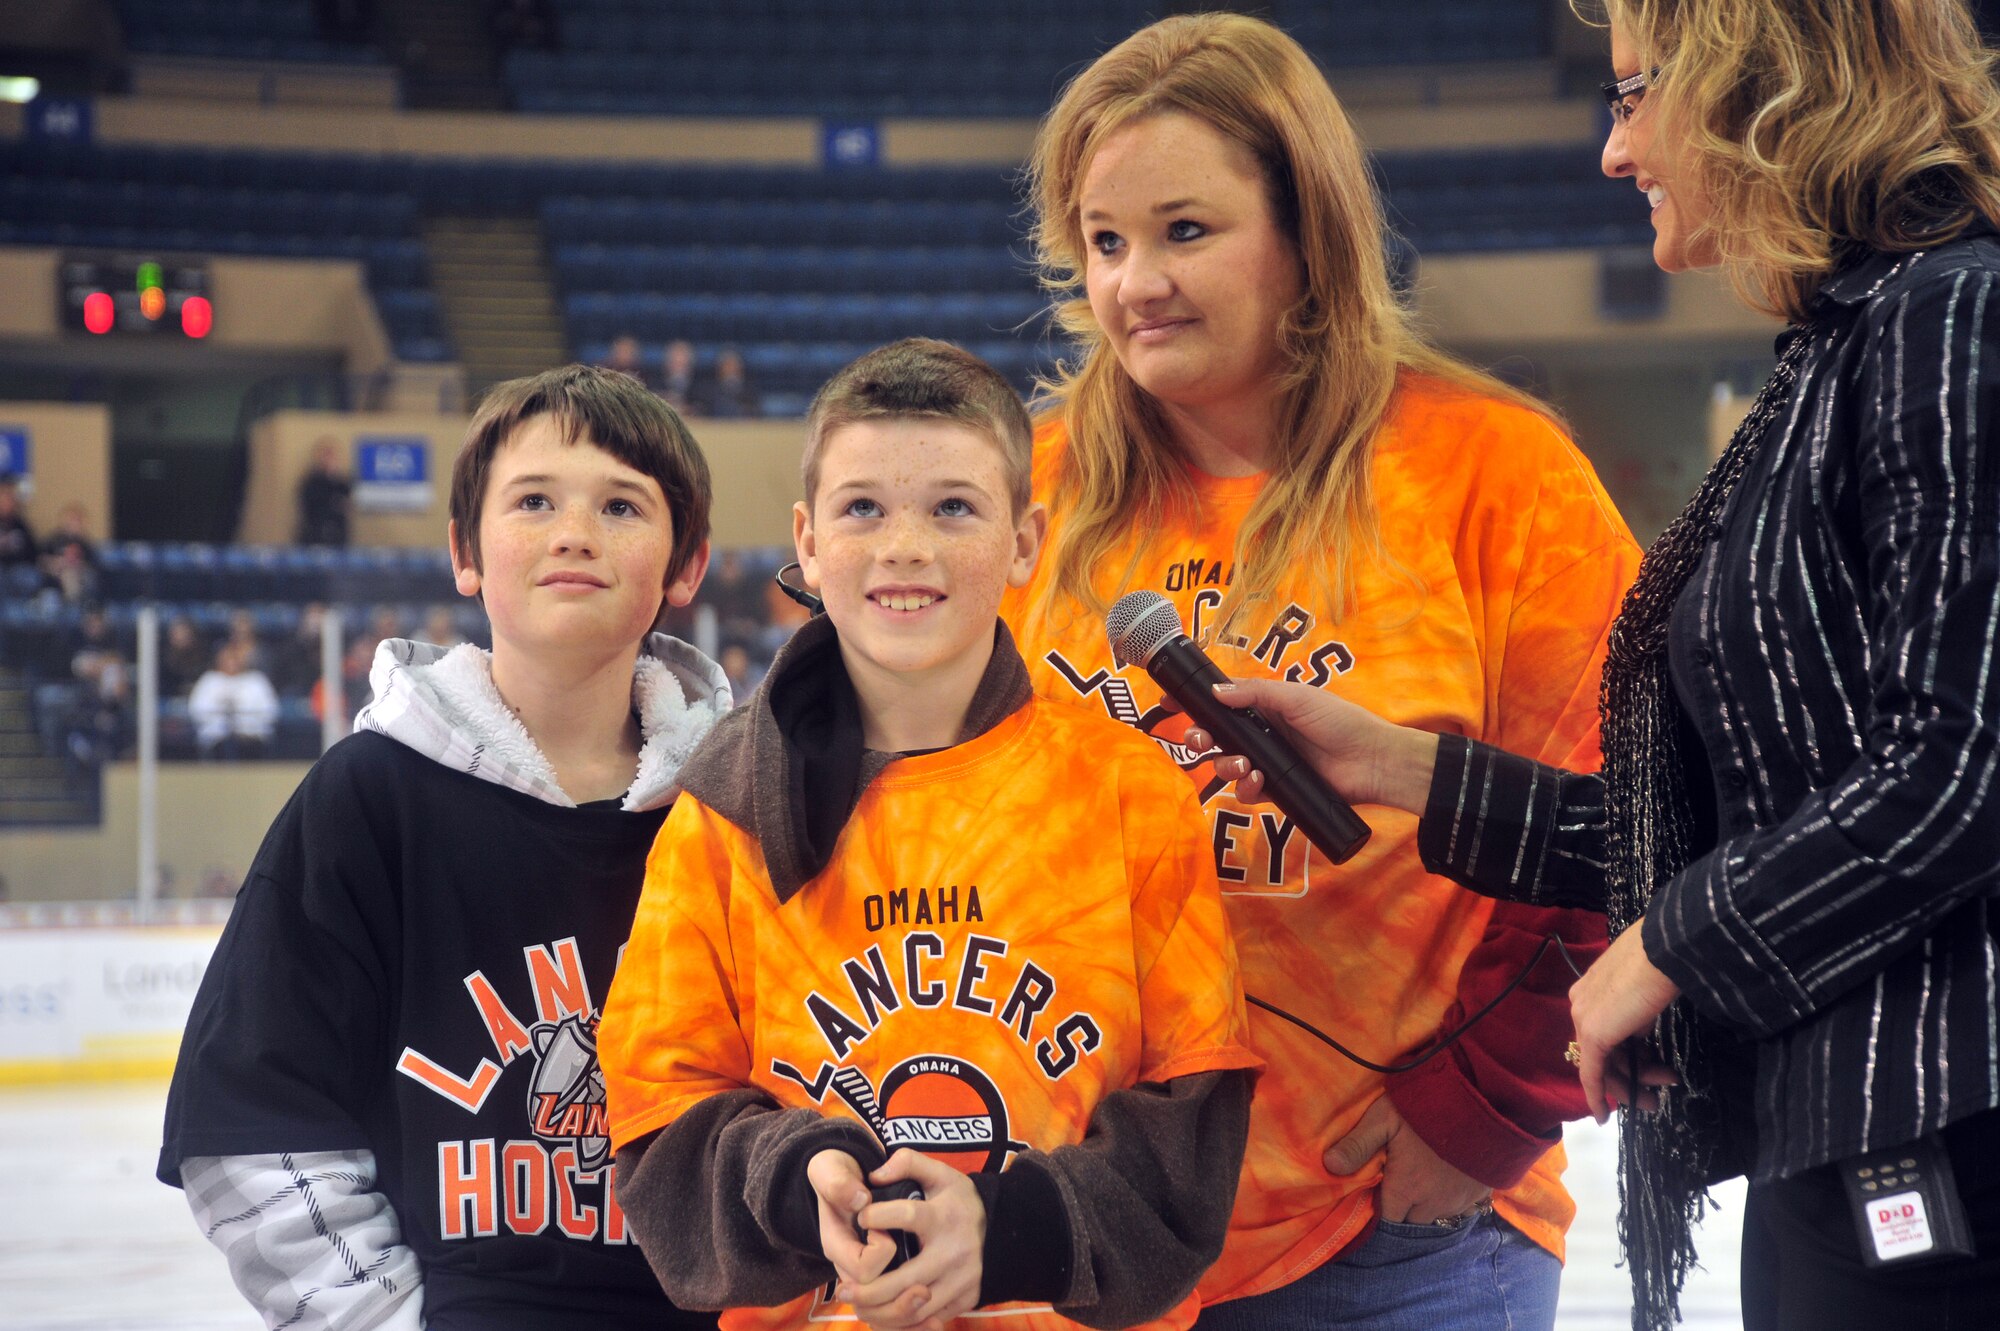 Gregory, Isaac and Krista Peterson, family of deployed Master Sgt. James Peterson, 55th Aircraft Maintenance Squadron, prepares to throw out the first puck for an Omaha Lancers hockey game at the Omaha Civic Auditorium in Omaha, Neb Nov. 11.  The family also got to speak with James on the big screen as part of a Veterans Day salute.